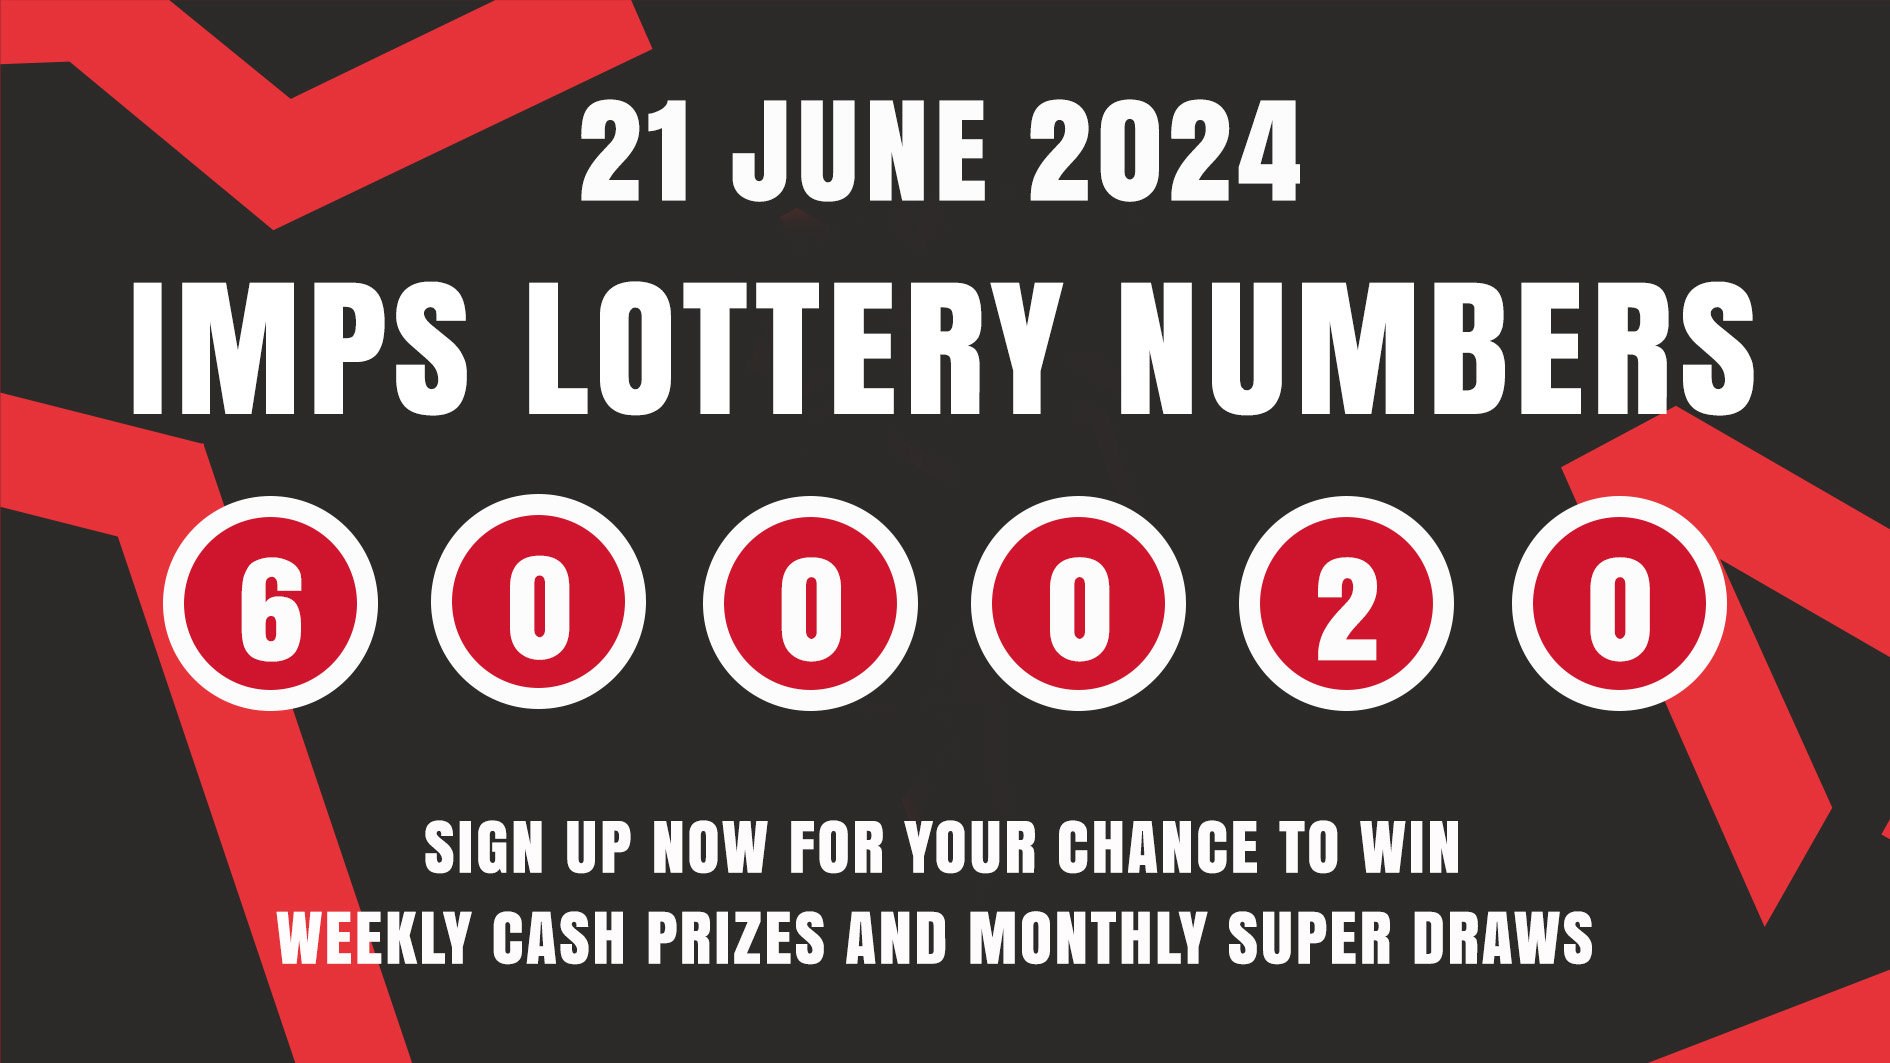 Imps Lottery winning numbers 21/06: 6,0,0,0,2,0